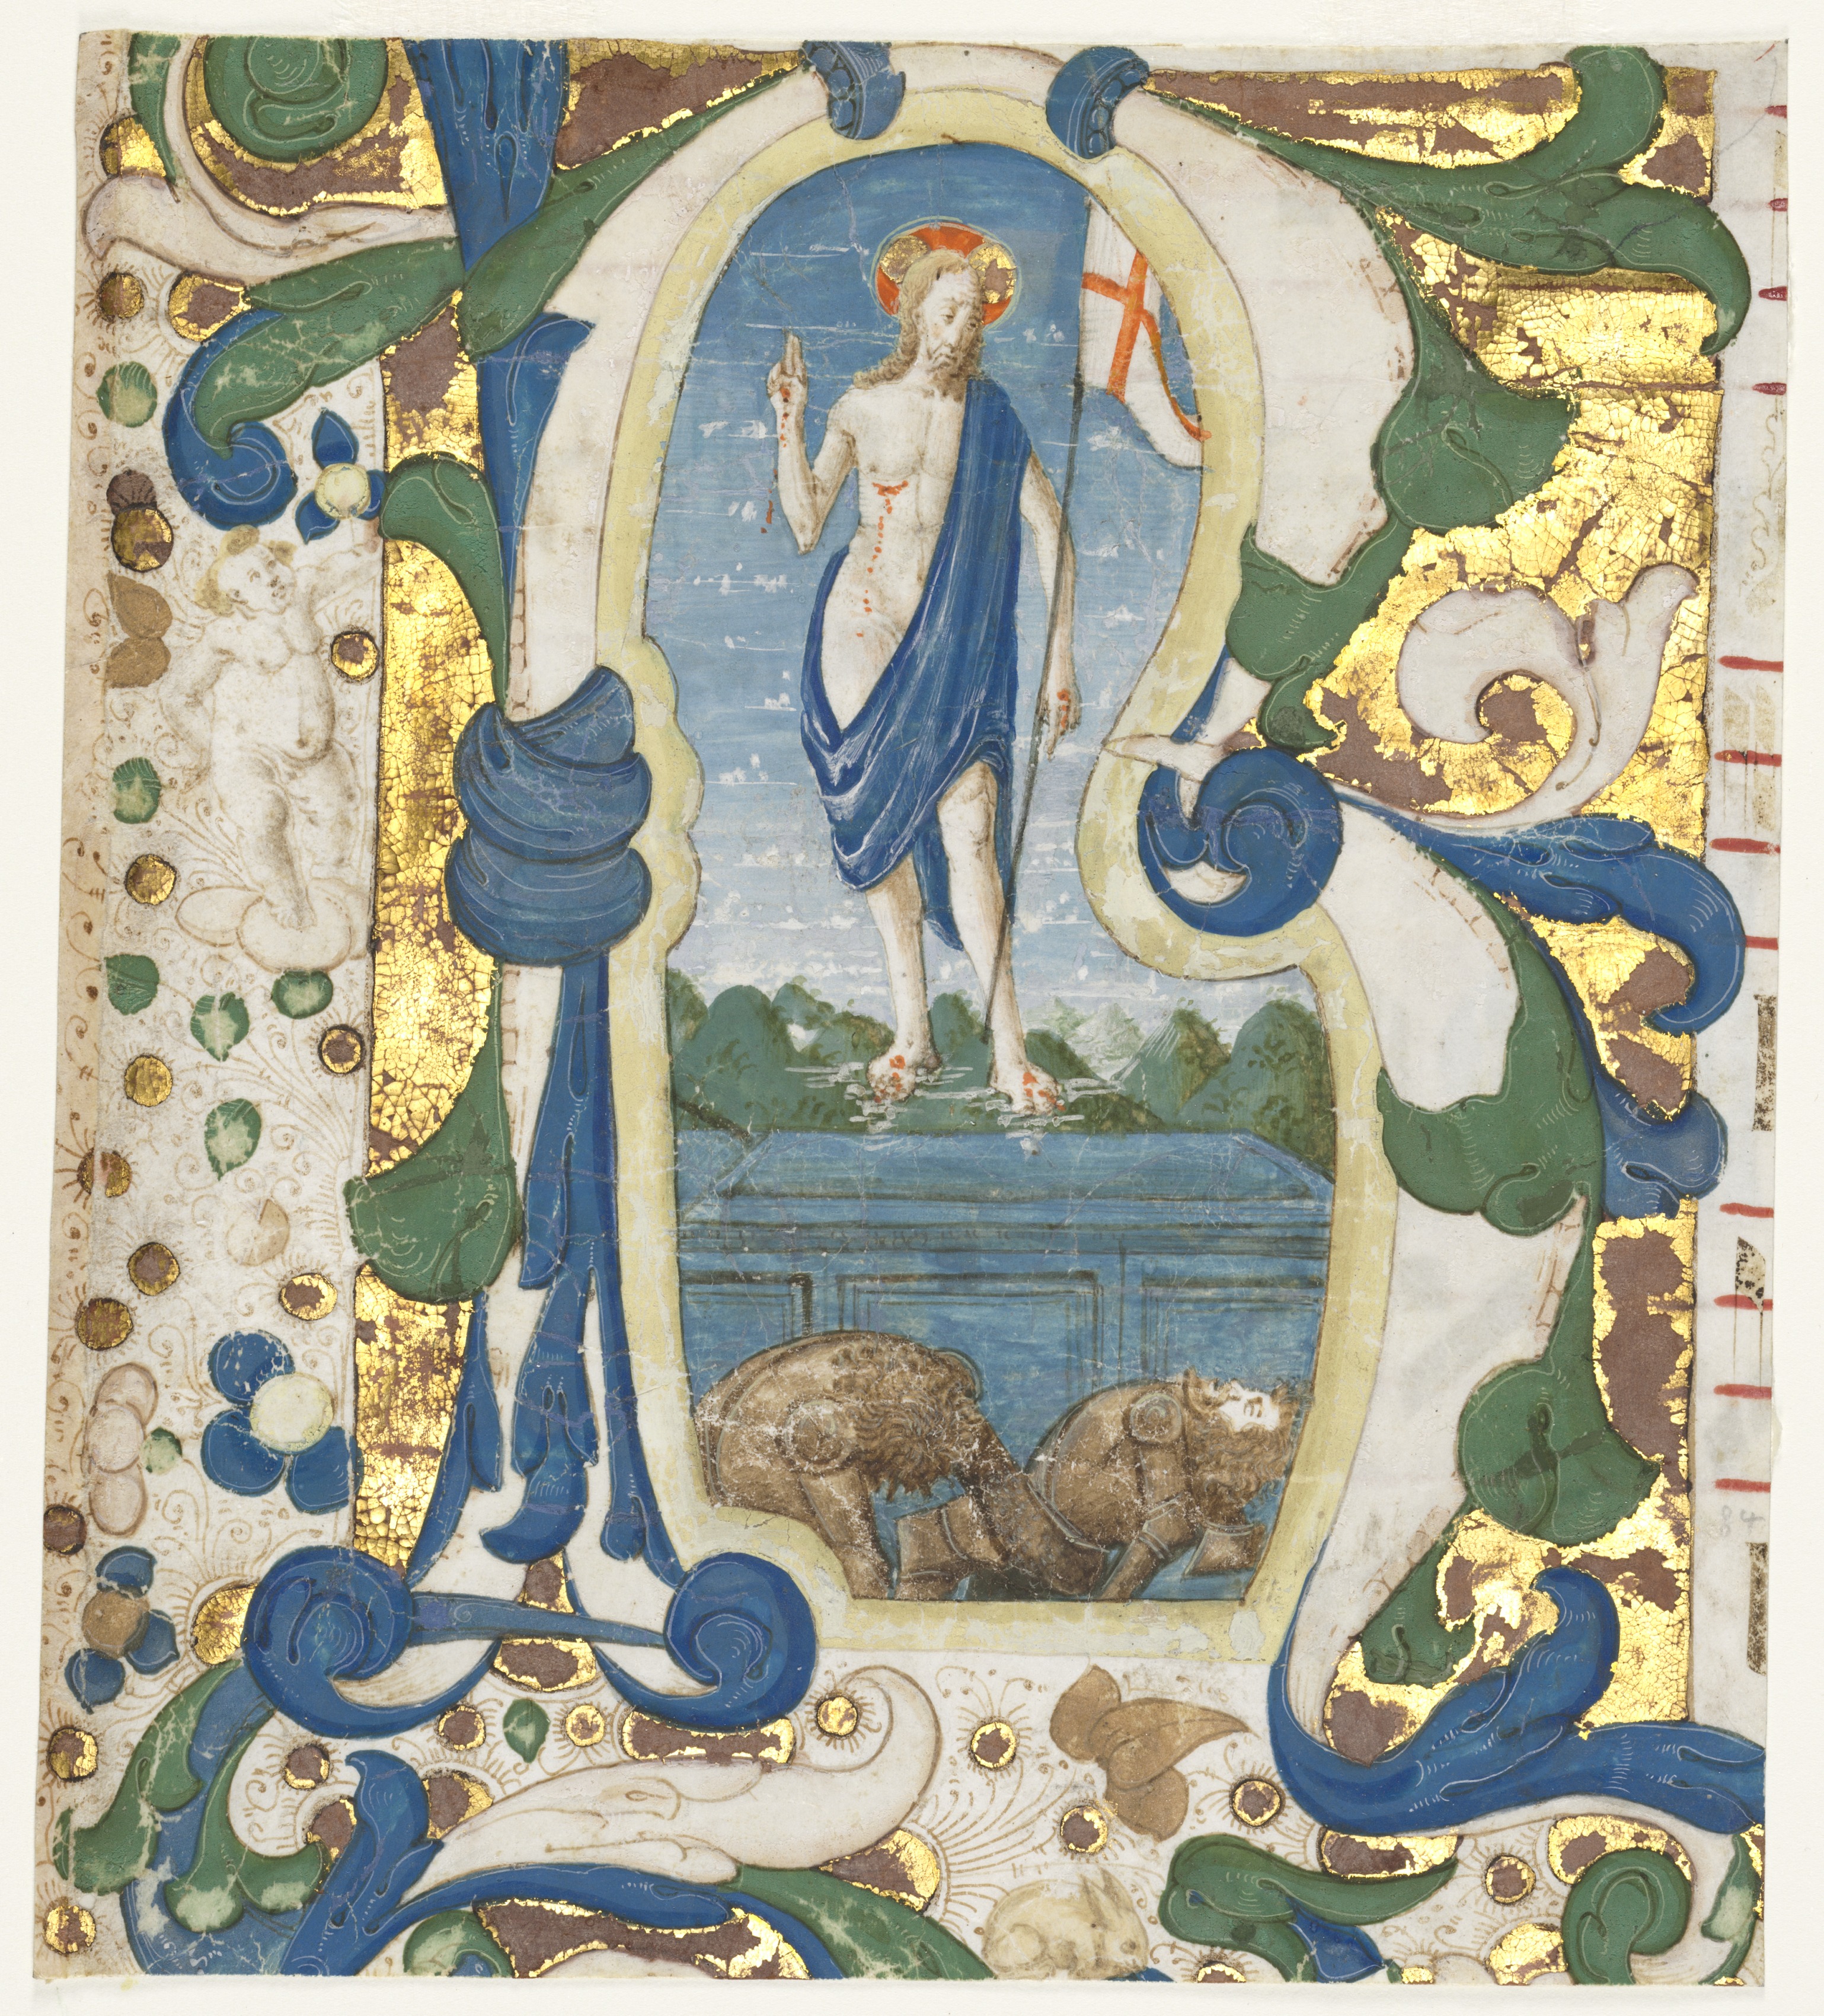 Historiated Initial (R) Excised from an Antiphonary: The Resurrection